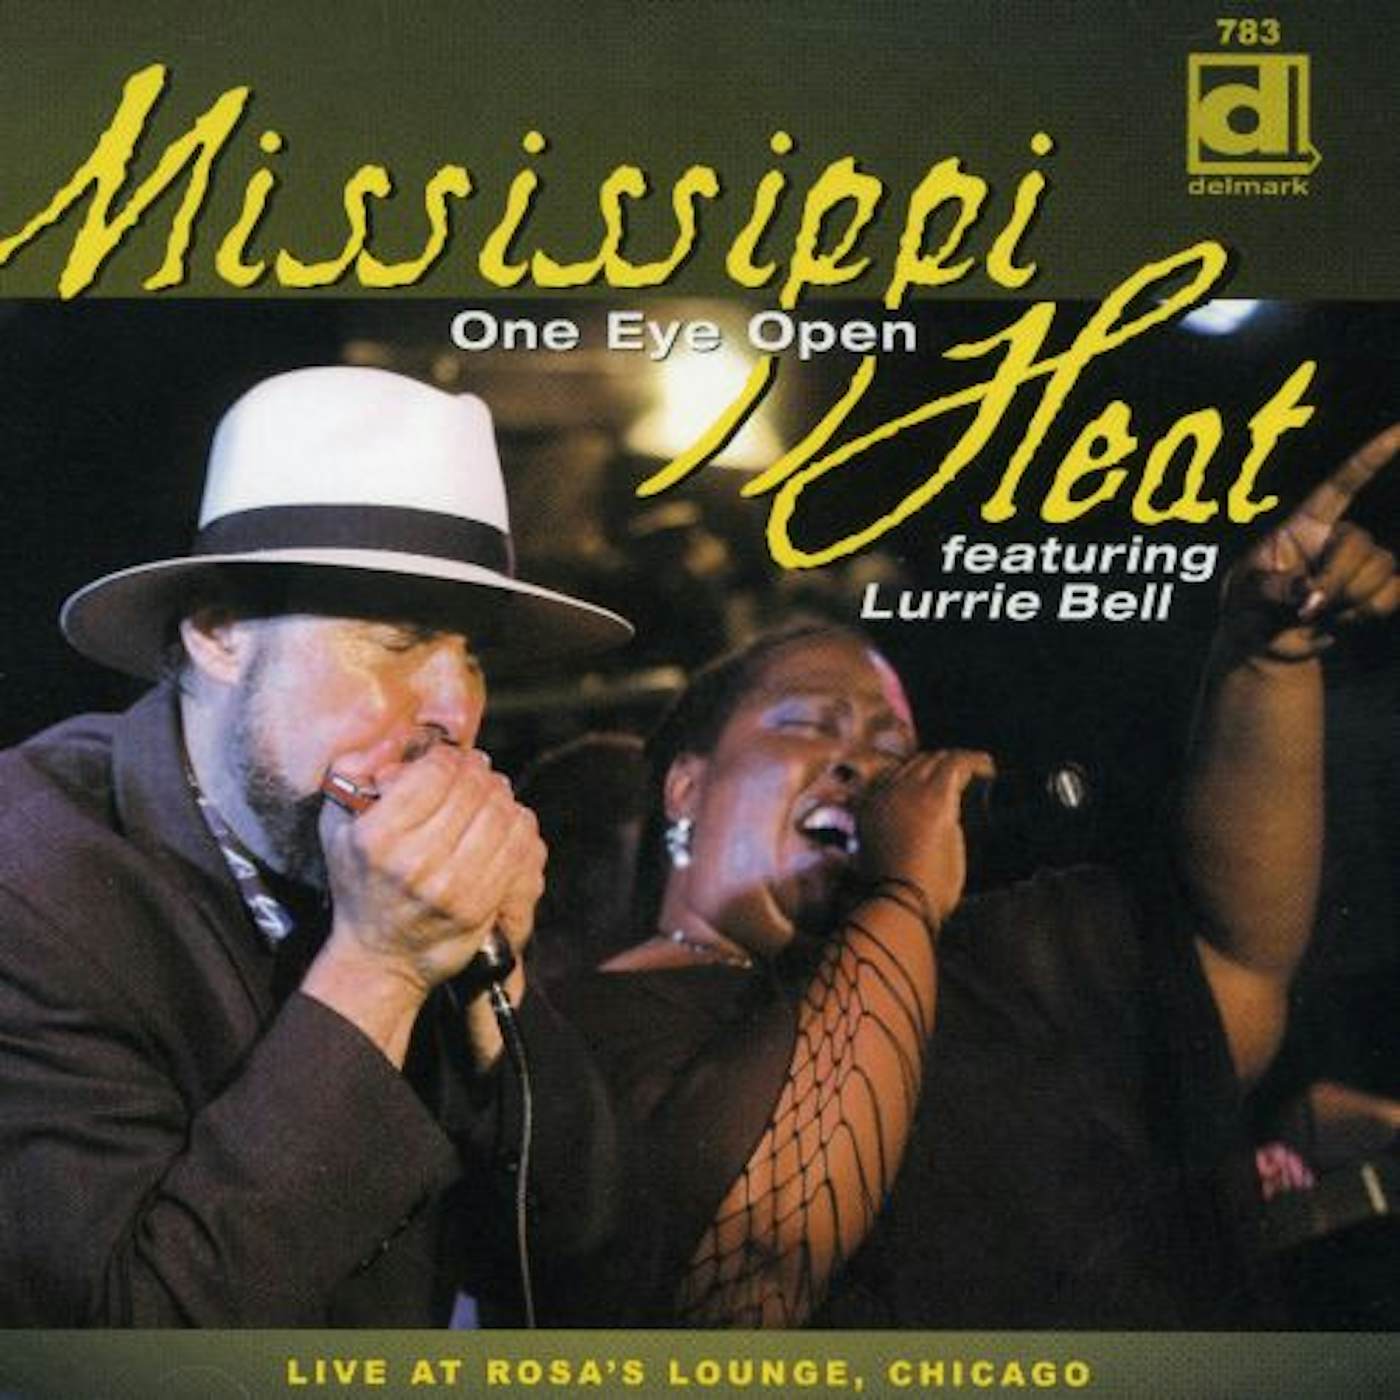 Mississippi Heat ONE EYE OPEN: LIVE AT ROSA'S LOUNGE CHICAGO CD